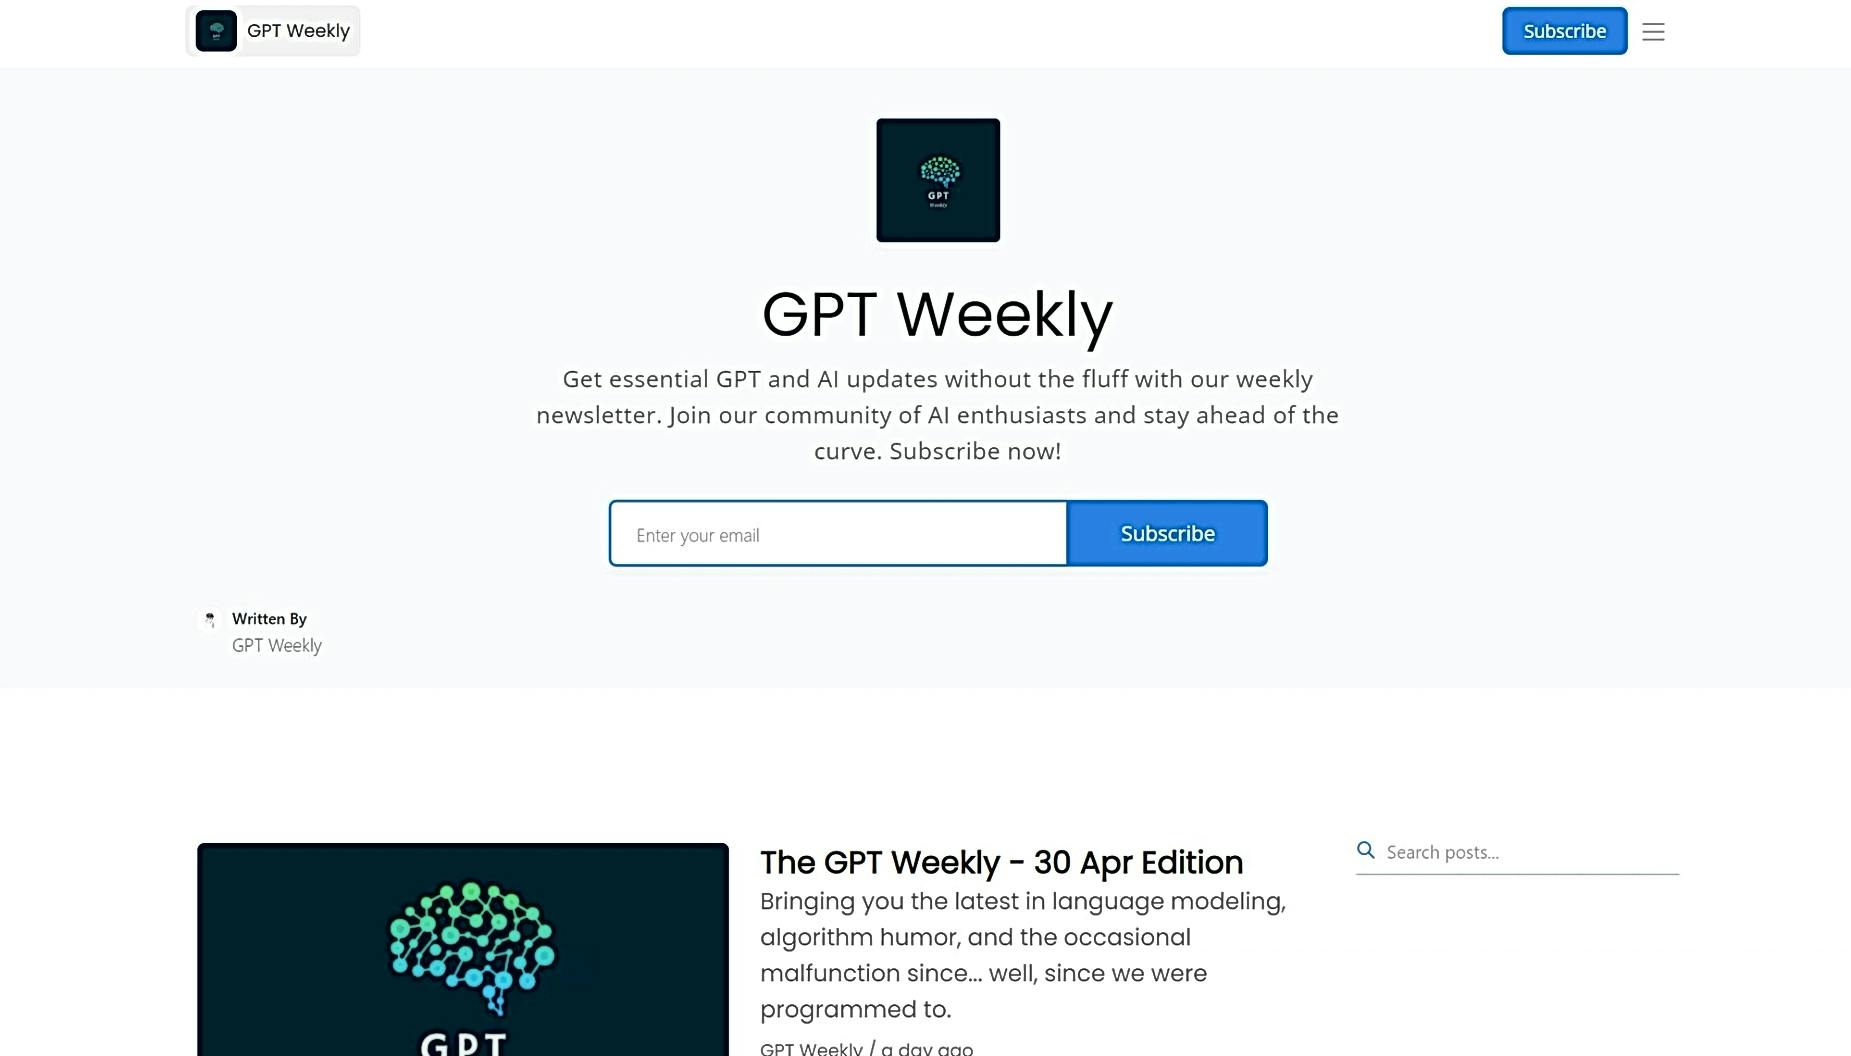 GPT Weekly featured